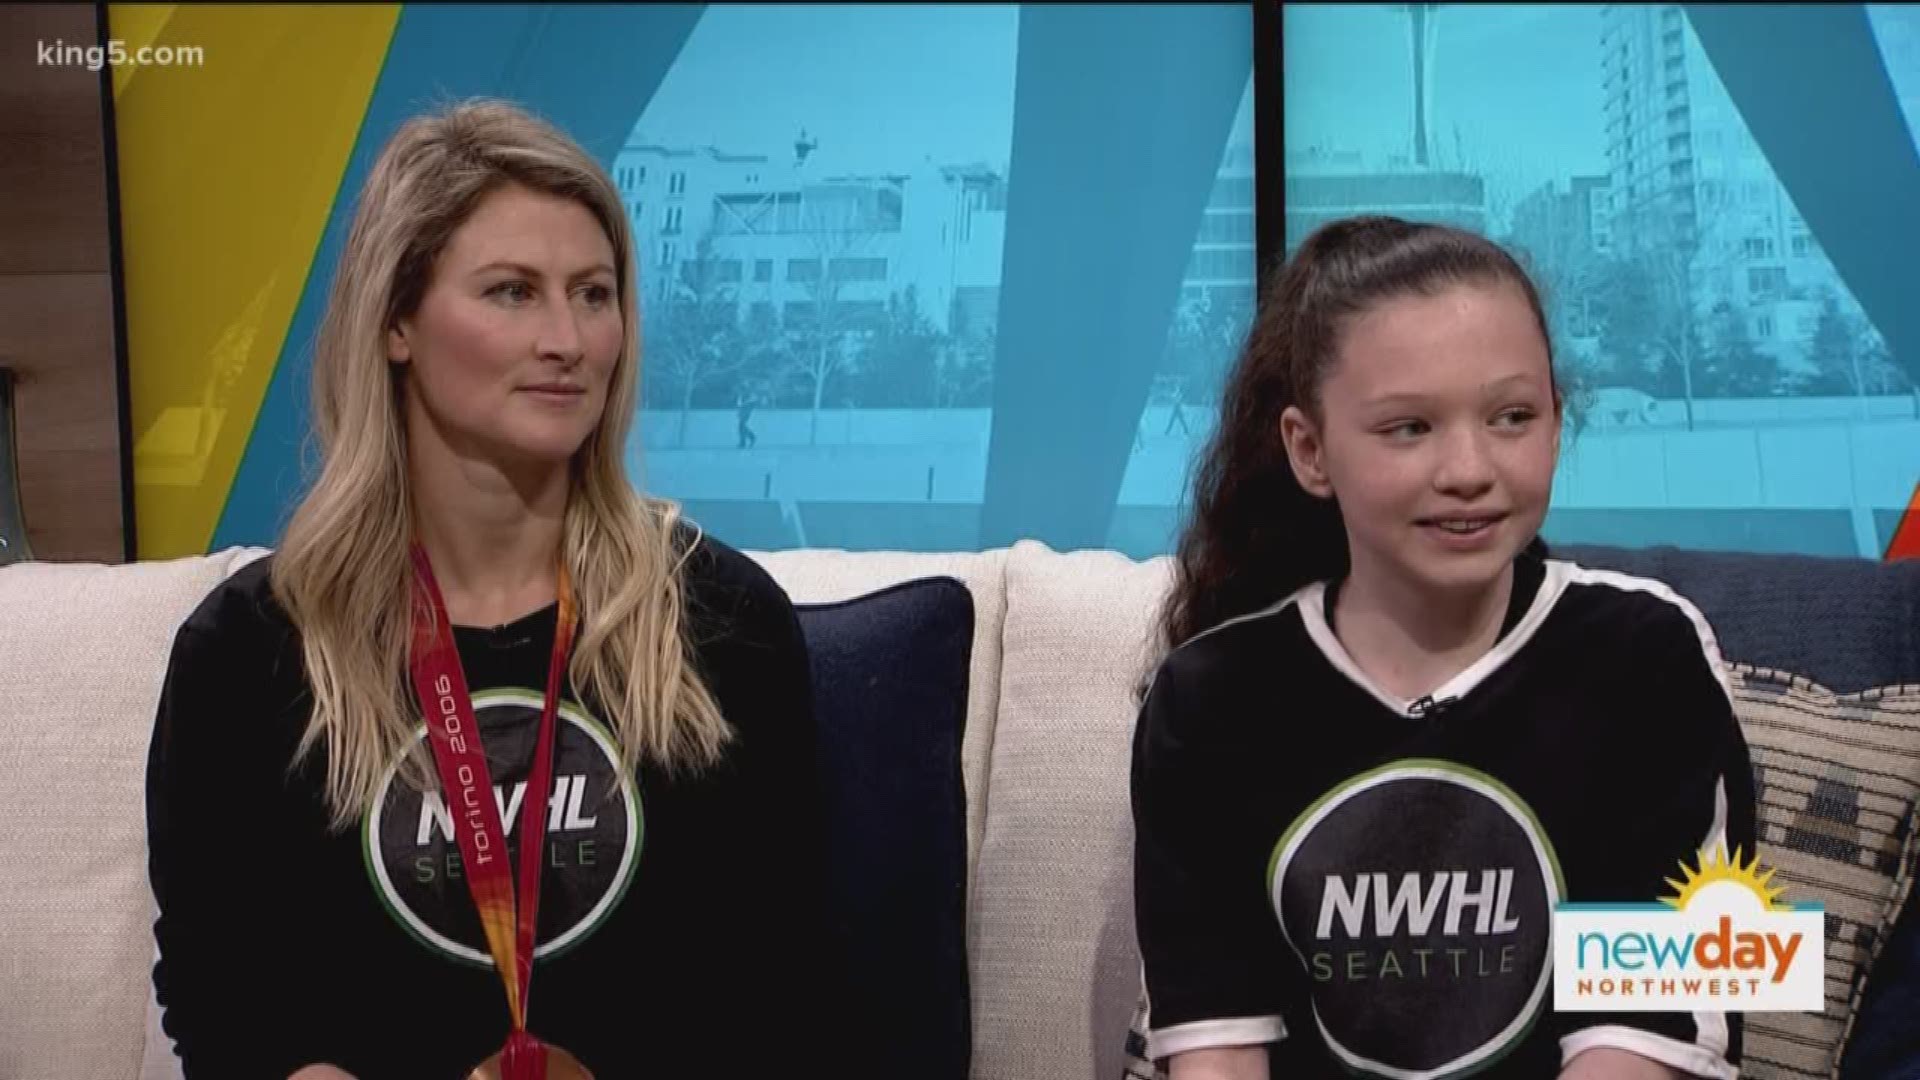 Bronze medal winner Kelly Stephens-Tysland and Paige Nottingham from the Washington Wild's 12UAA elite hockey team shared why Seattle would benefit from an NWHL team.